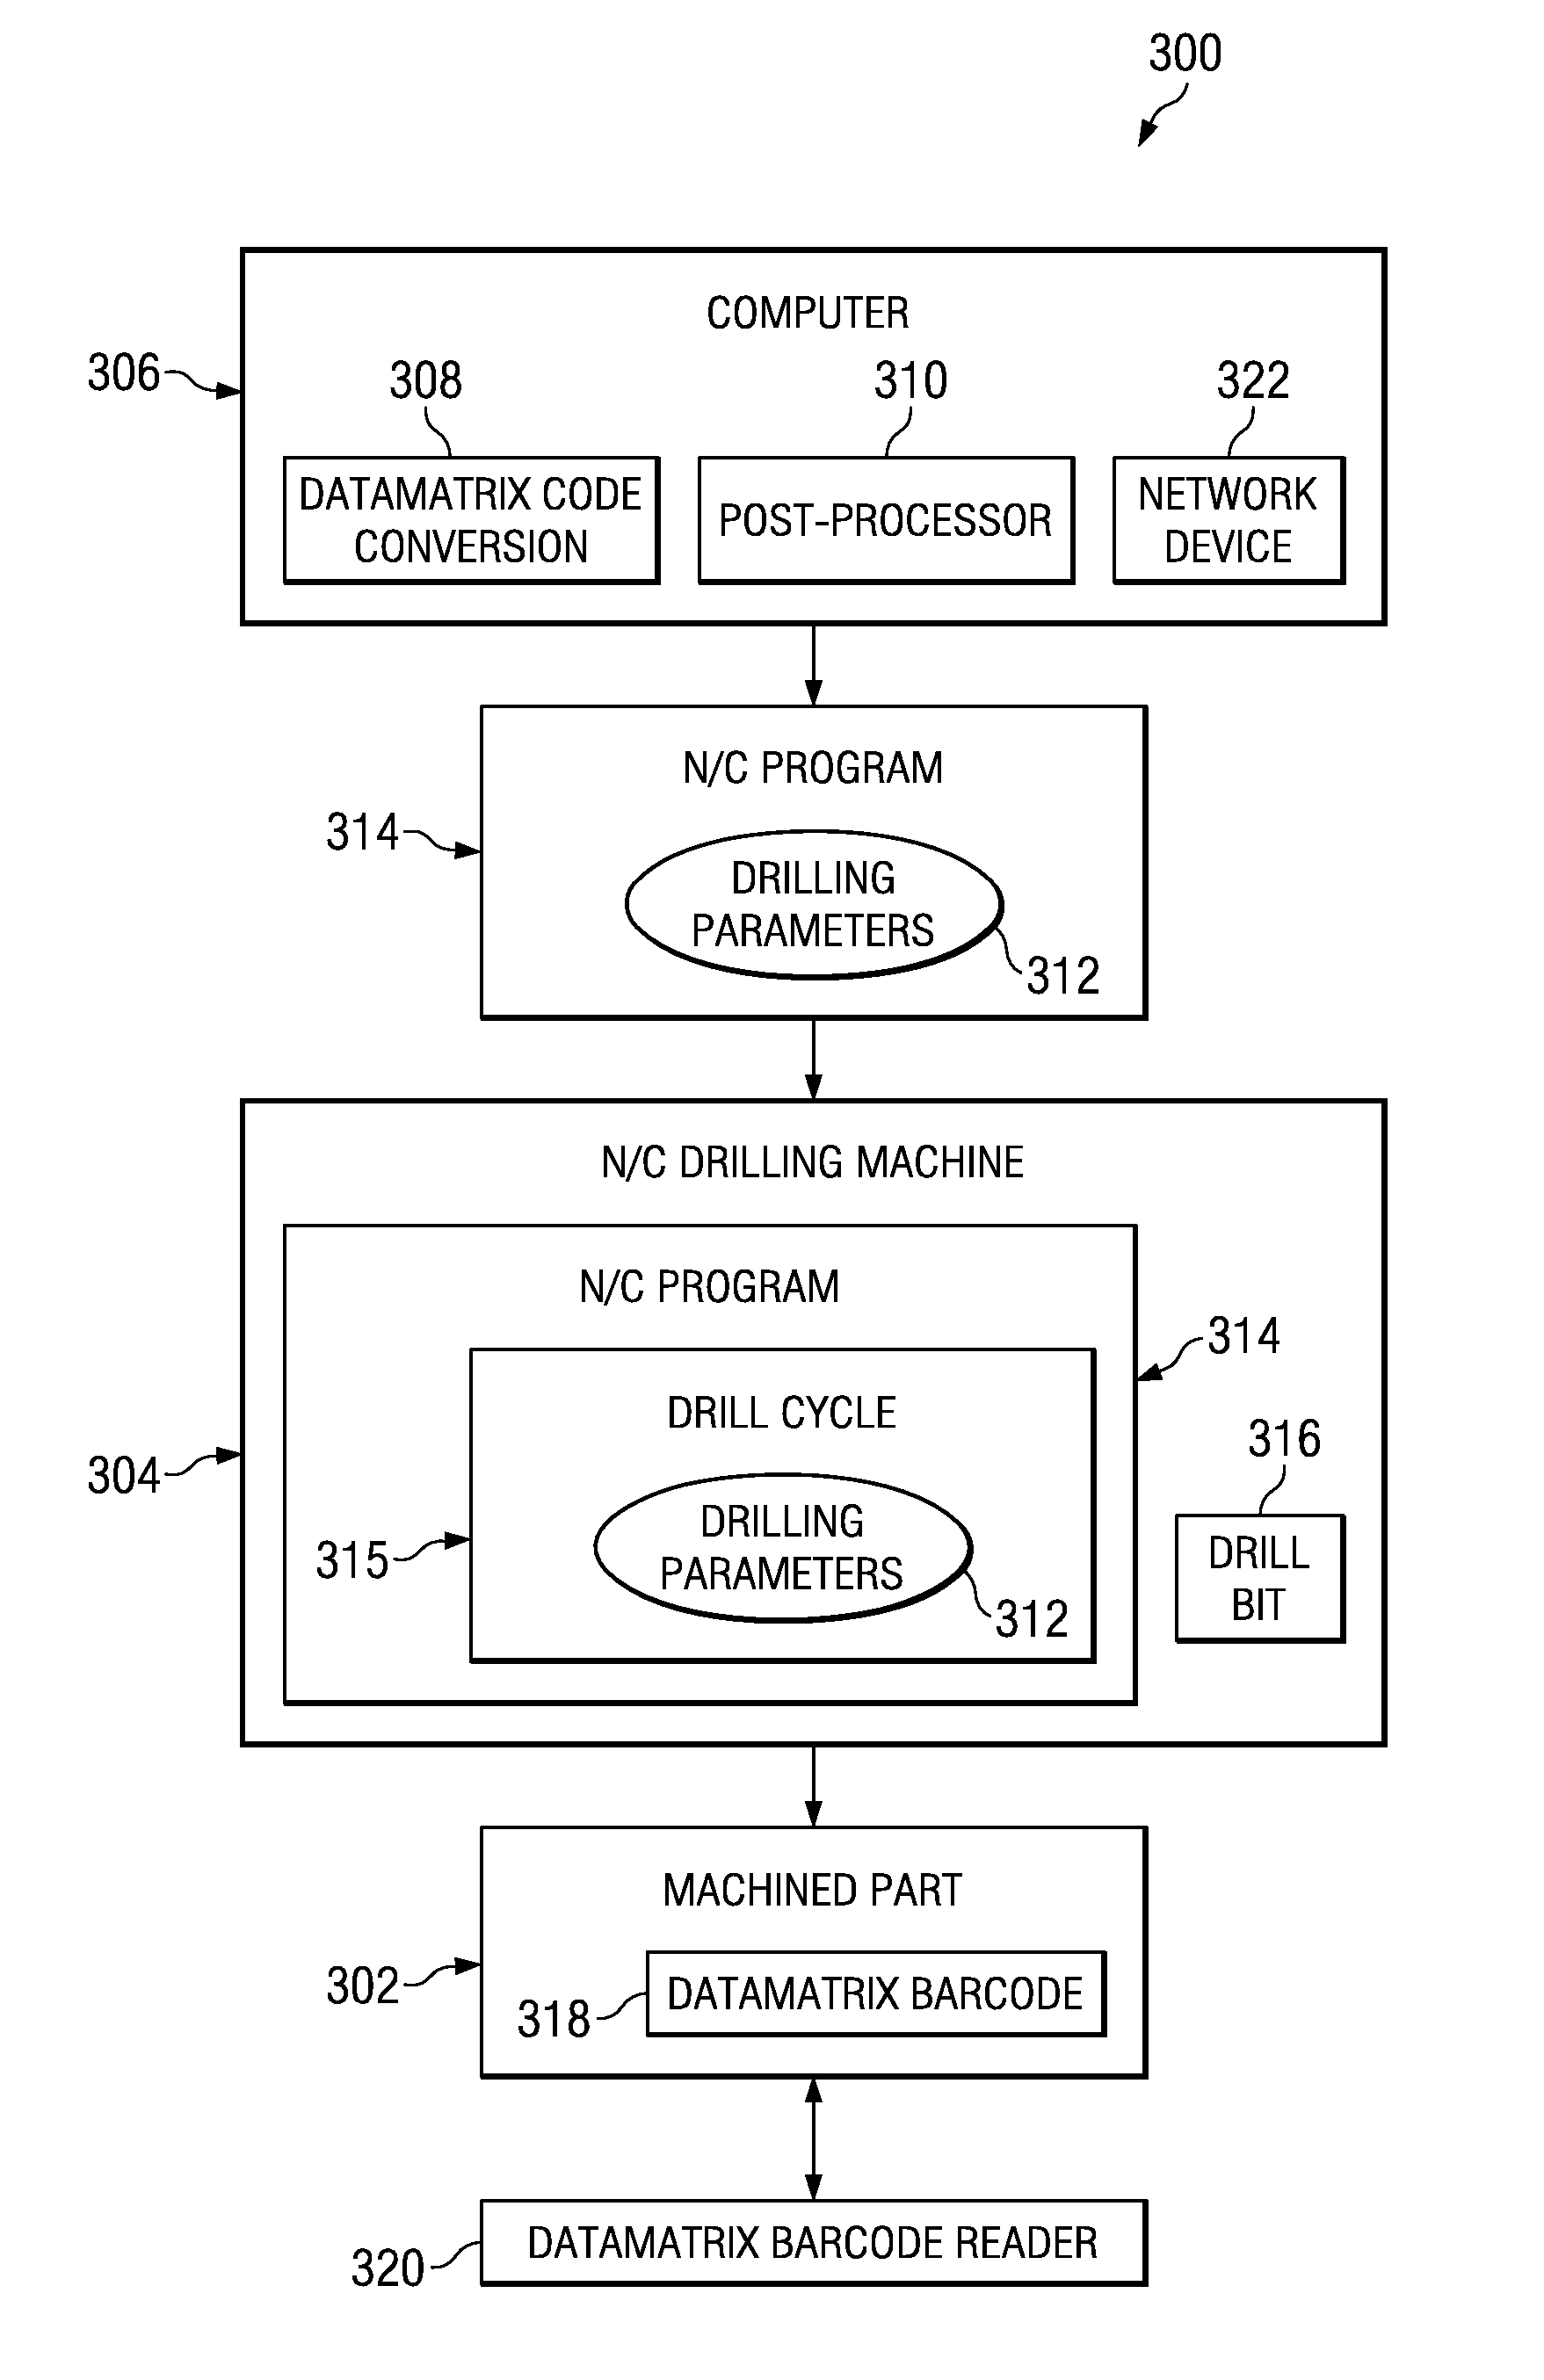 Method and apparatus for generation of datamatrix barcodes utilizing numerical control drilling patterns